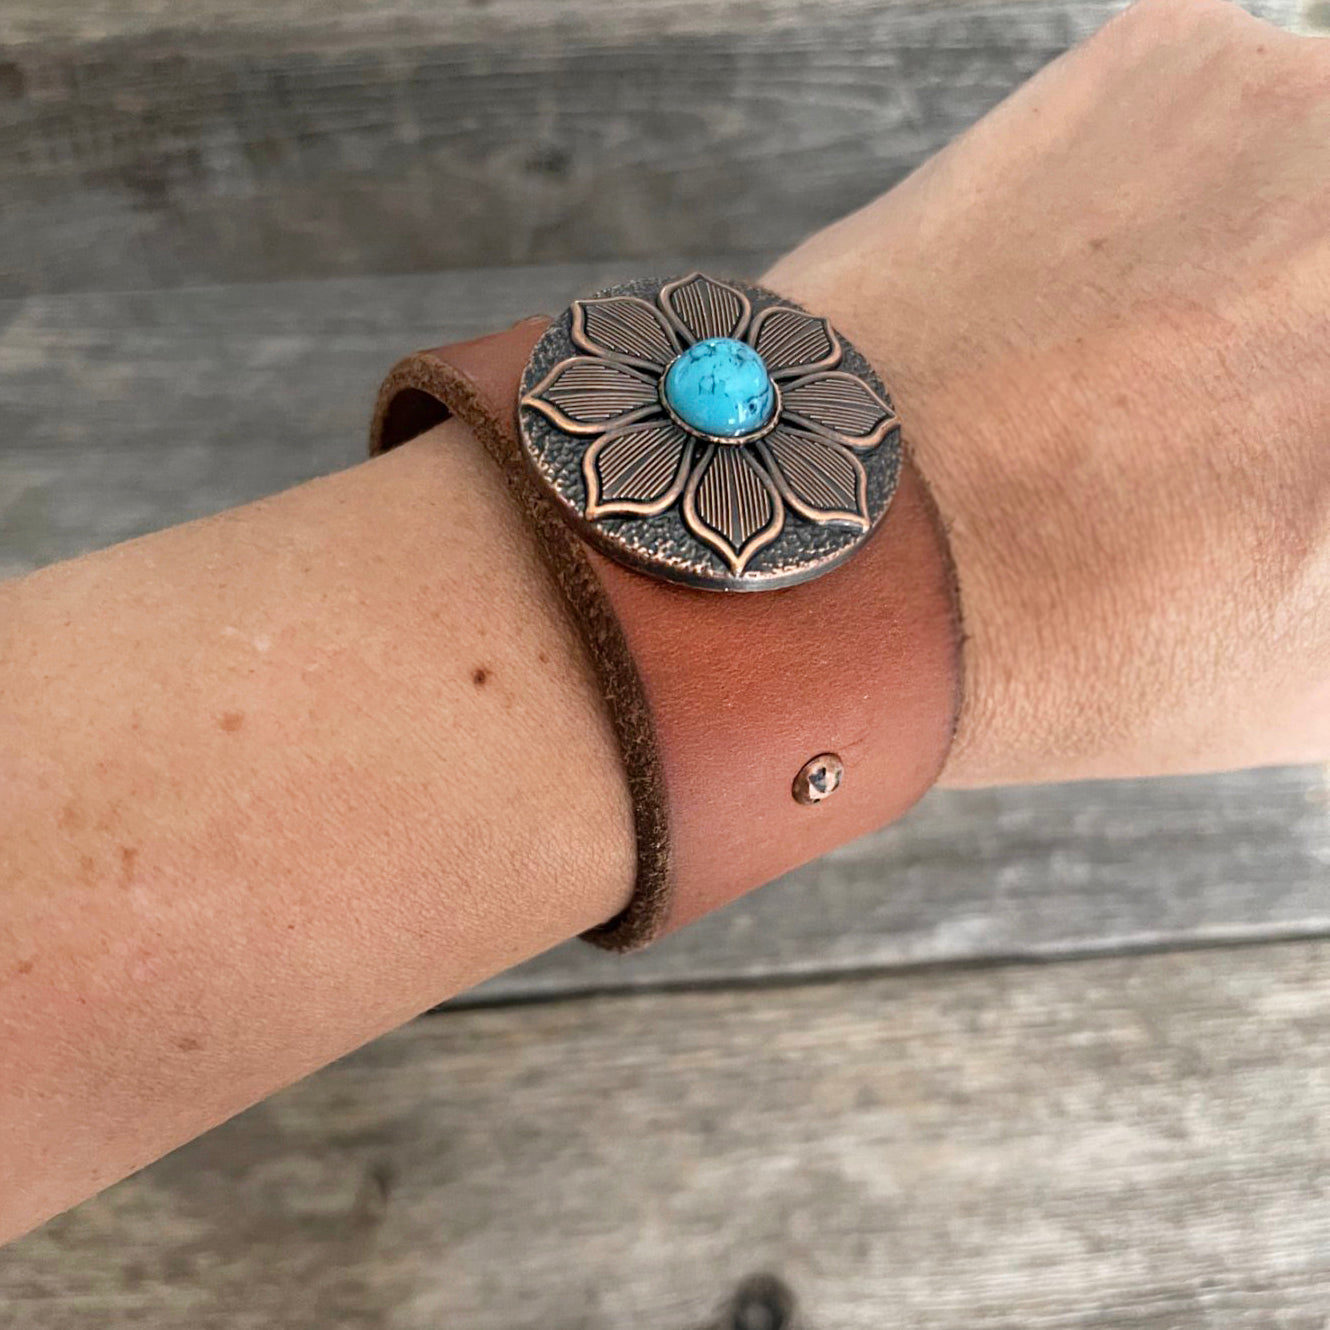 One of a kind genuine leather bracelet with antique copper flower concho